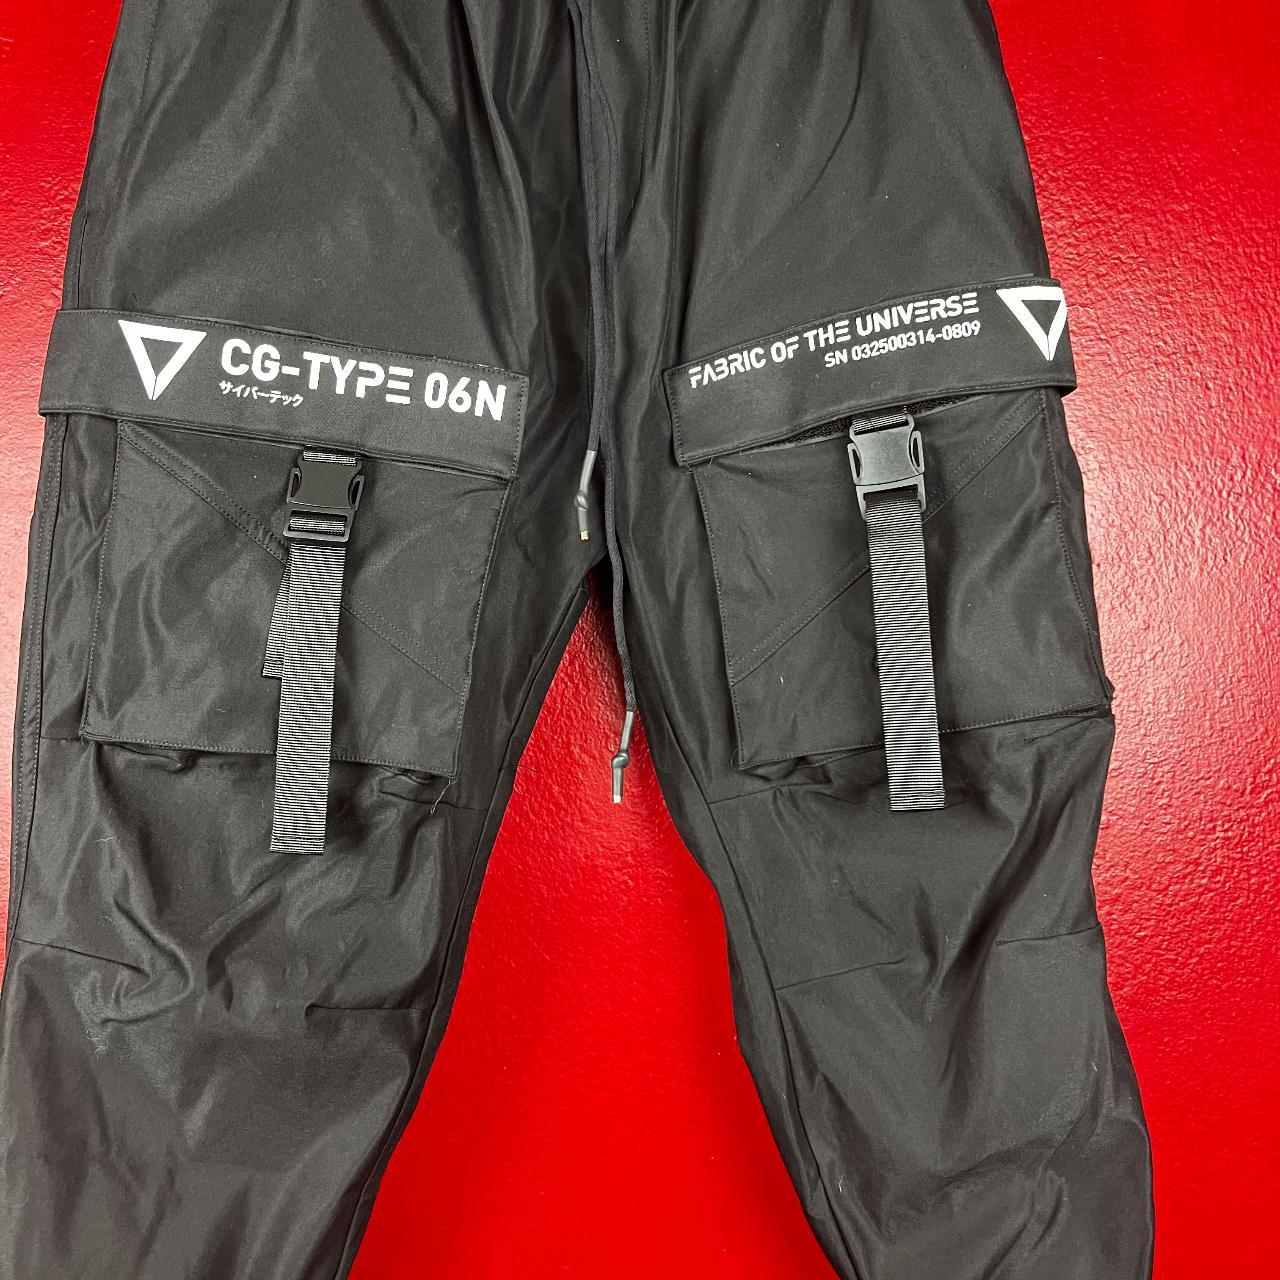 CG-Type 06N Black Cargo Pants - Fabric of the Universe